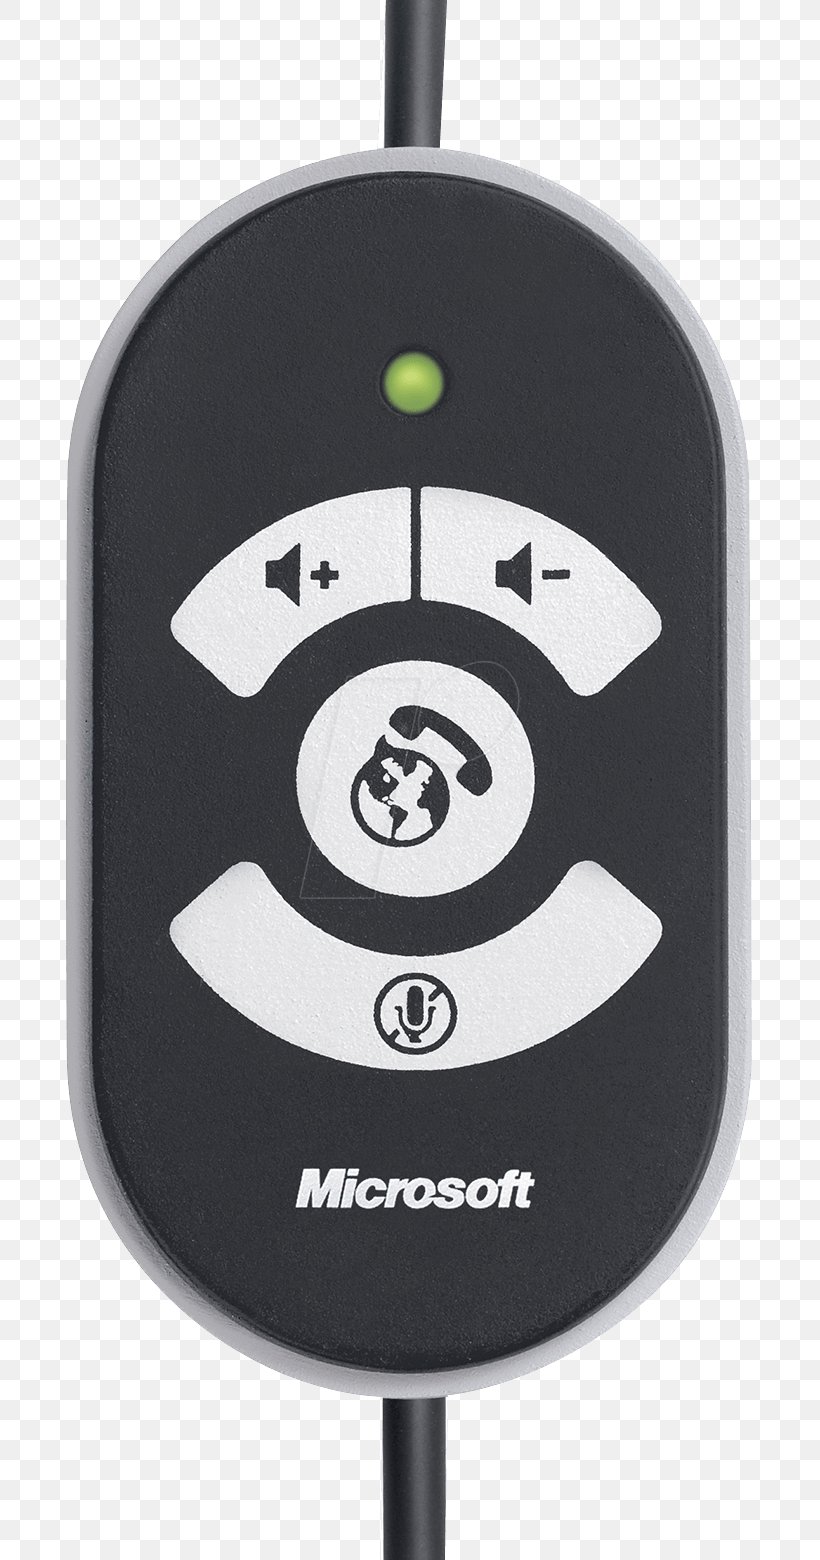 Microphone Microsoft LifeChat Headphones Headset, PNG, 703x1560px, Microphone, Computer, Consumer Electronics, Headphones, Headset Download Free